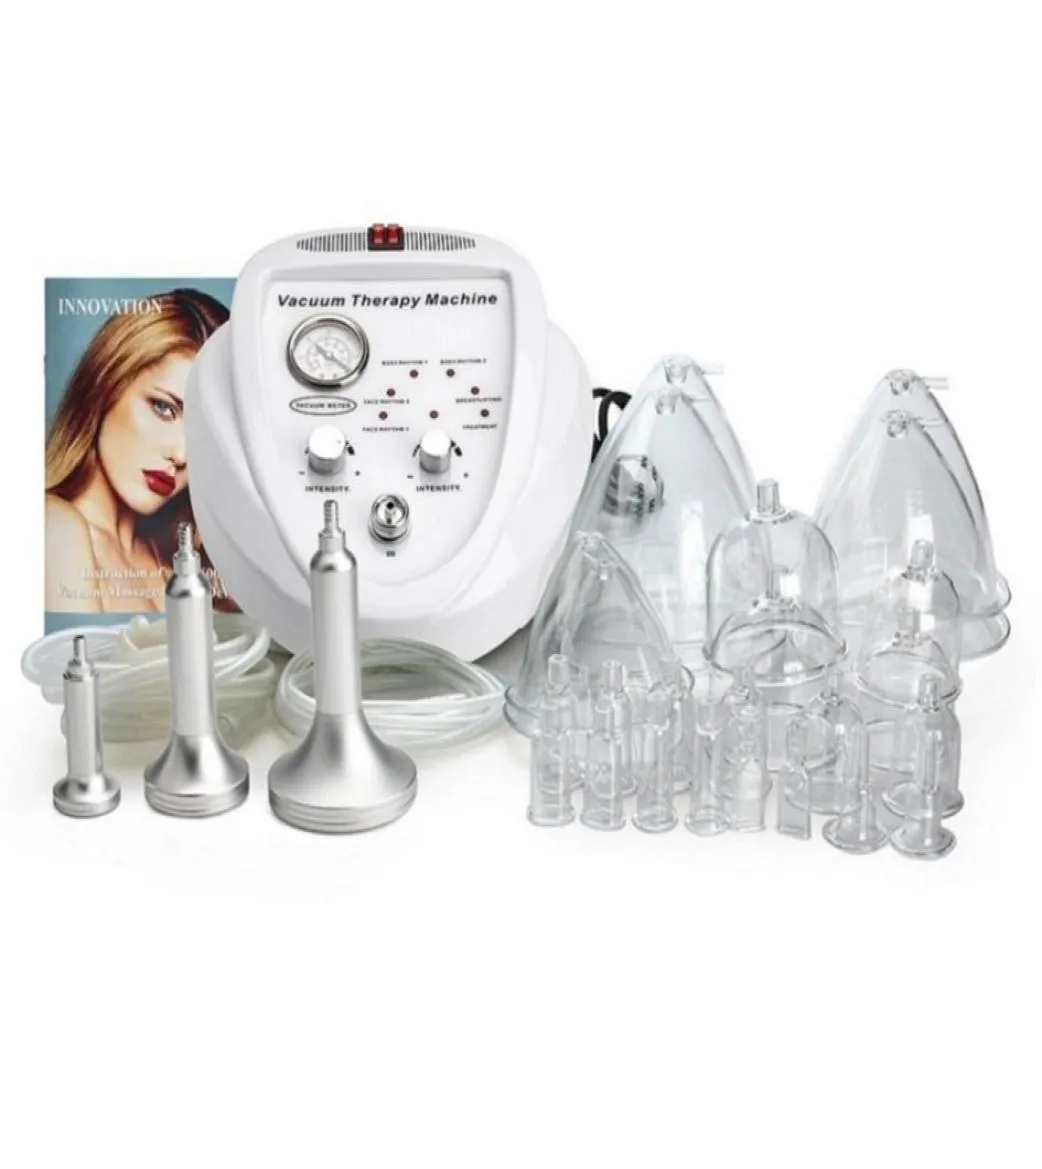 Breast pump breasts enlargemen Portable Slim Equipment Face and Body Therapy Massage Vacuum Cupping Machine5541362